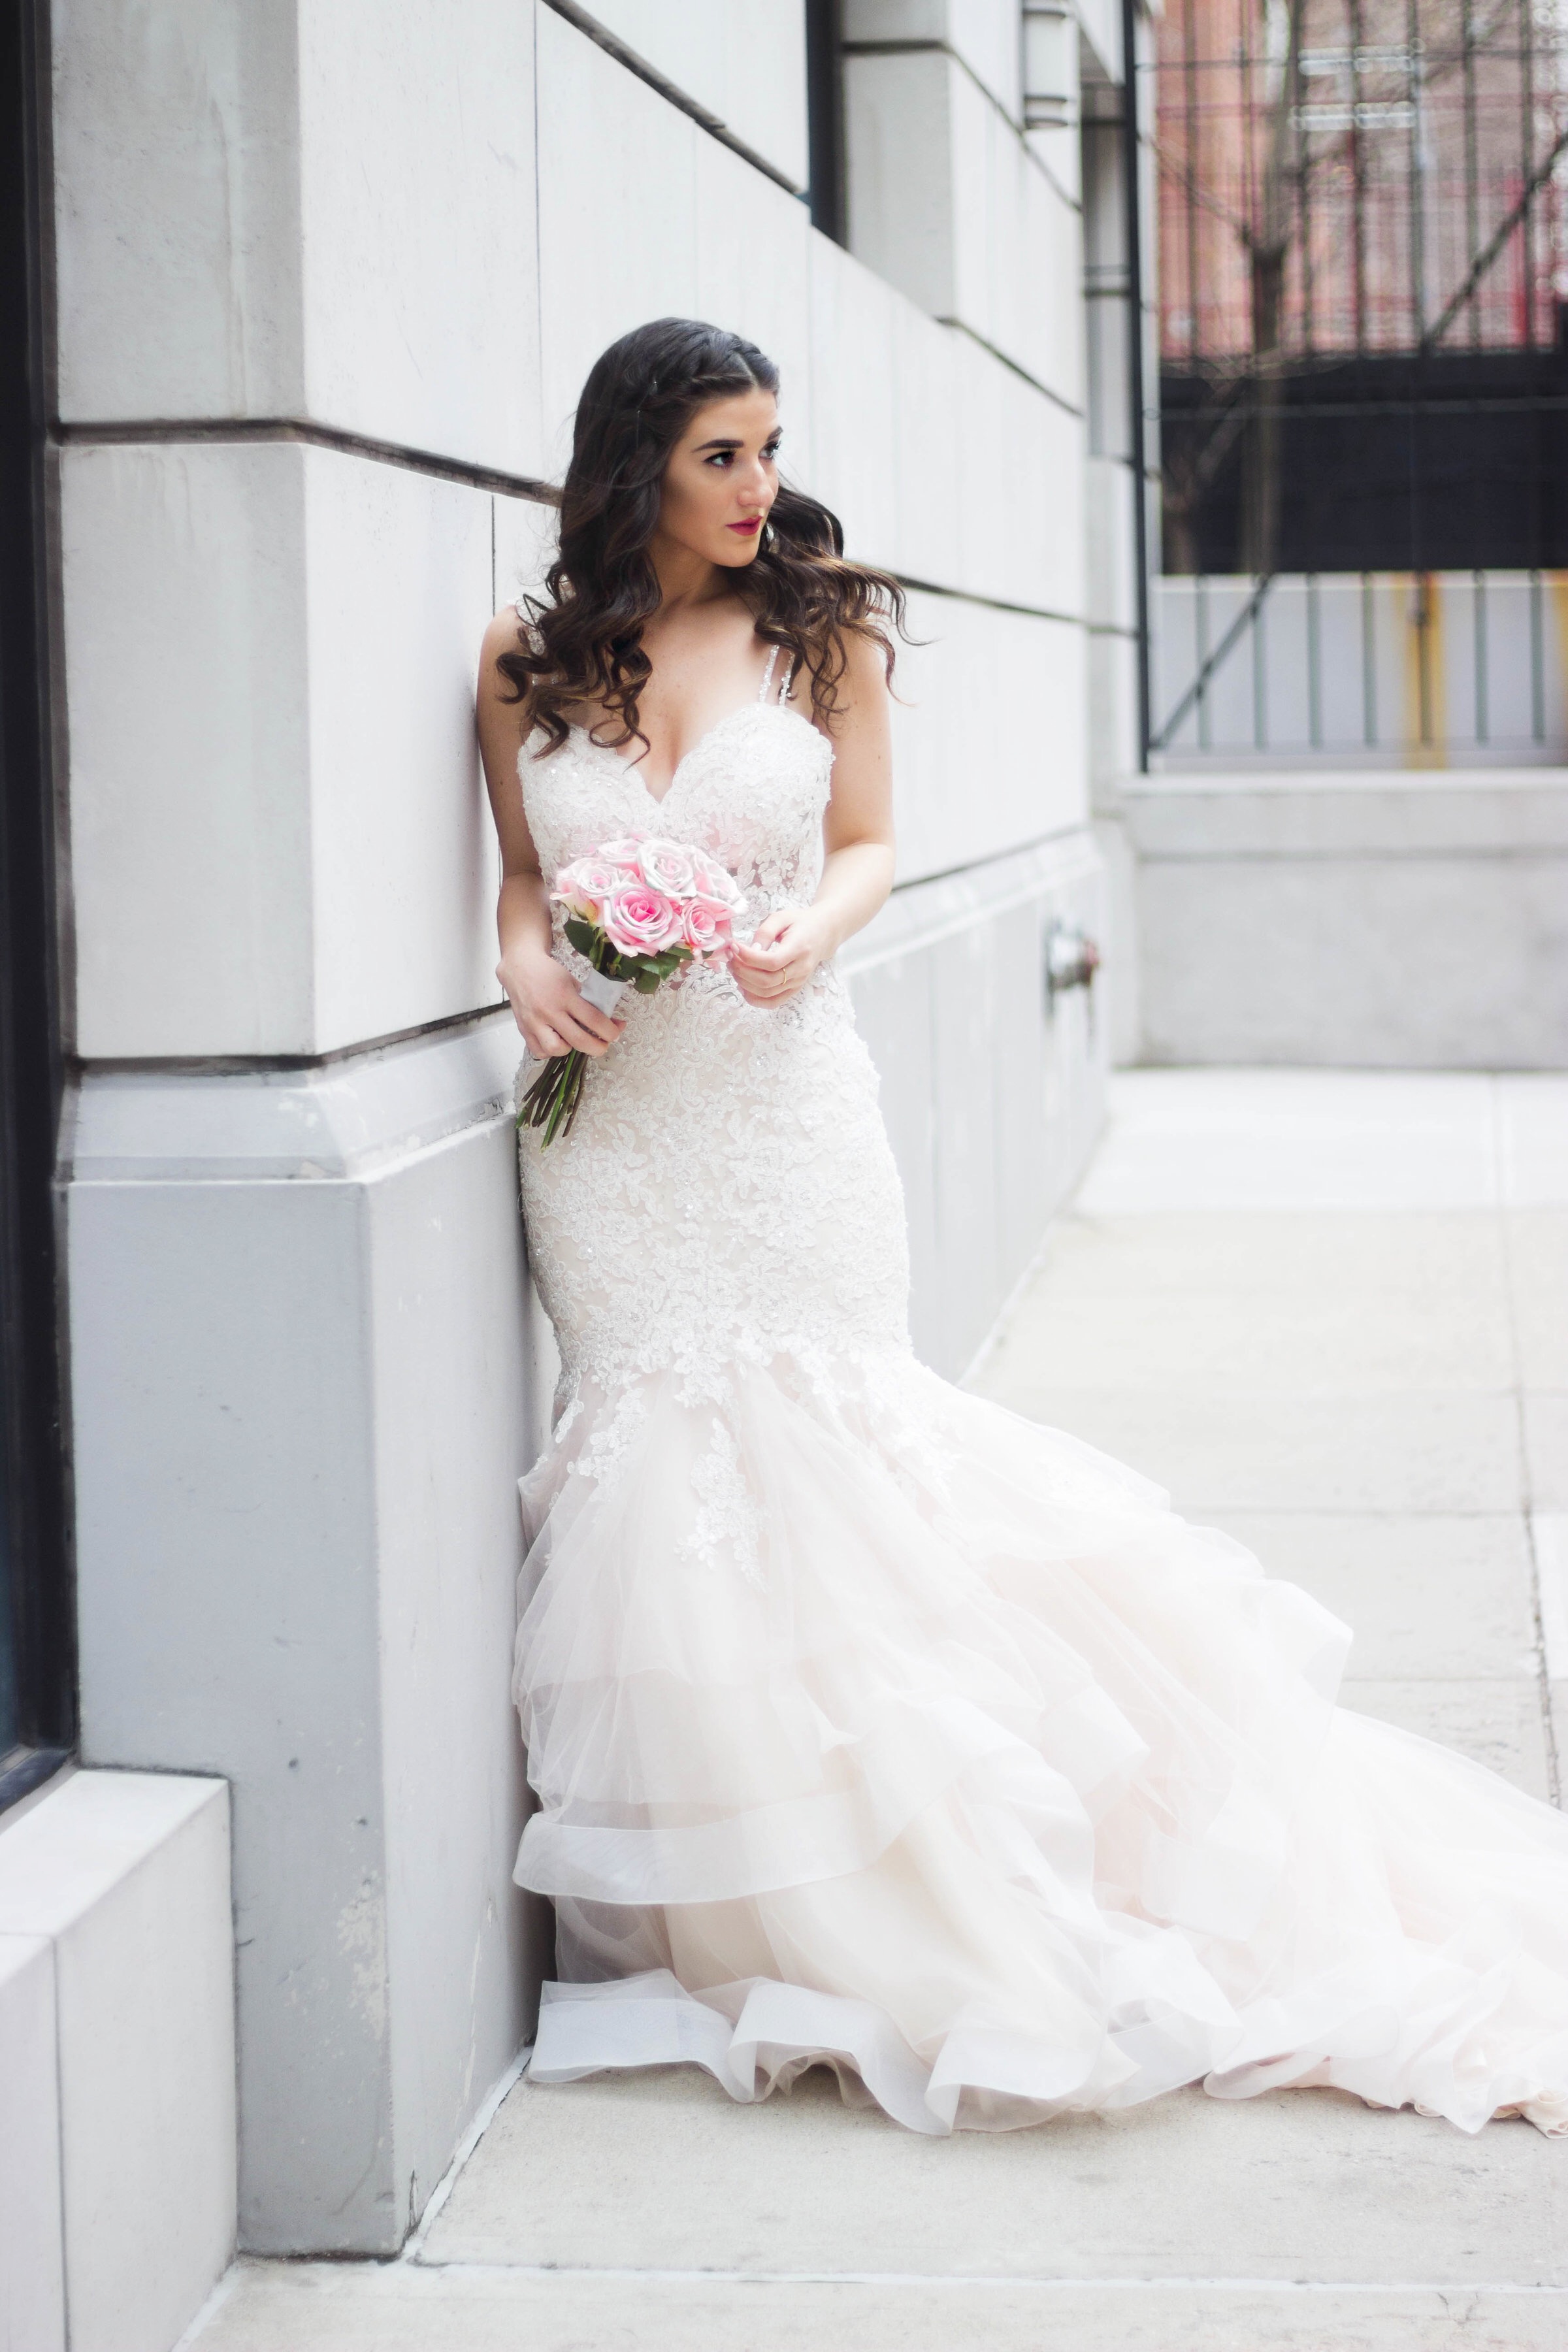 Playing Dress Up With Morilee Bridal Esther Santer Fashion Blog NYC Street Style Blogger Outfit OOTD Trendy Wedding Dress Gown White Dreamy Modern Timeless Beautiful Train Pink Flowers Bouquet Hair Hairstyle Beauty Makeup Lace Mermaid Trumpet  Flare.jpg